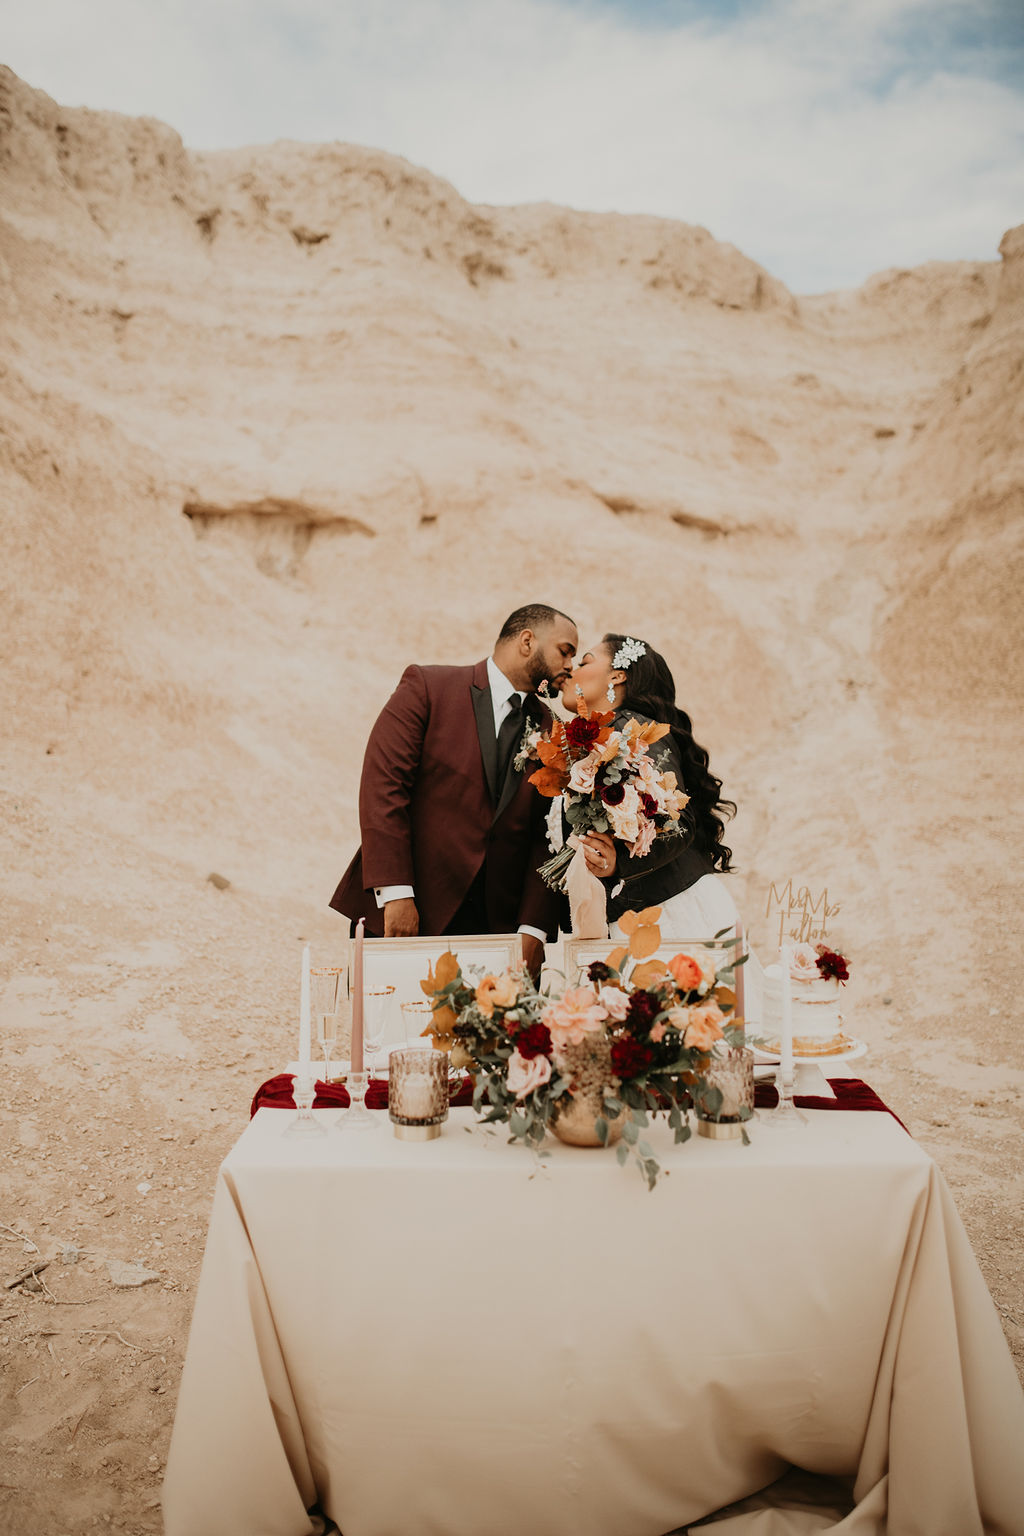 Newlyweds kissing behind the gold sweetheart table.